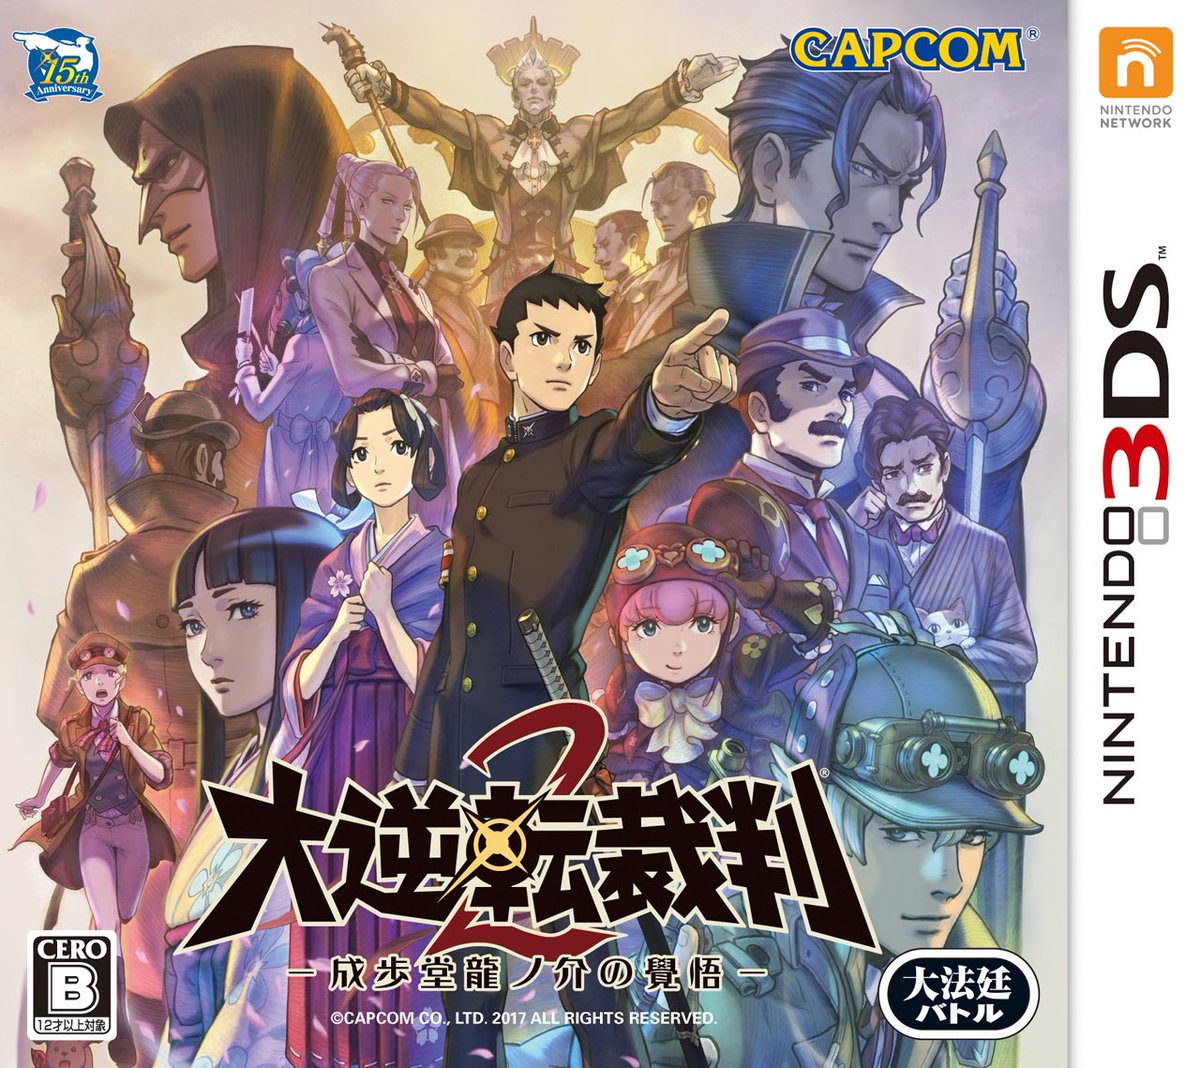 DGS 1 and 2 were only released in Japan, but are some of the coolest games in the series! They take place in the distant past and feature new protag Ryūnosuke and Sherlock Holmes as the detective!